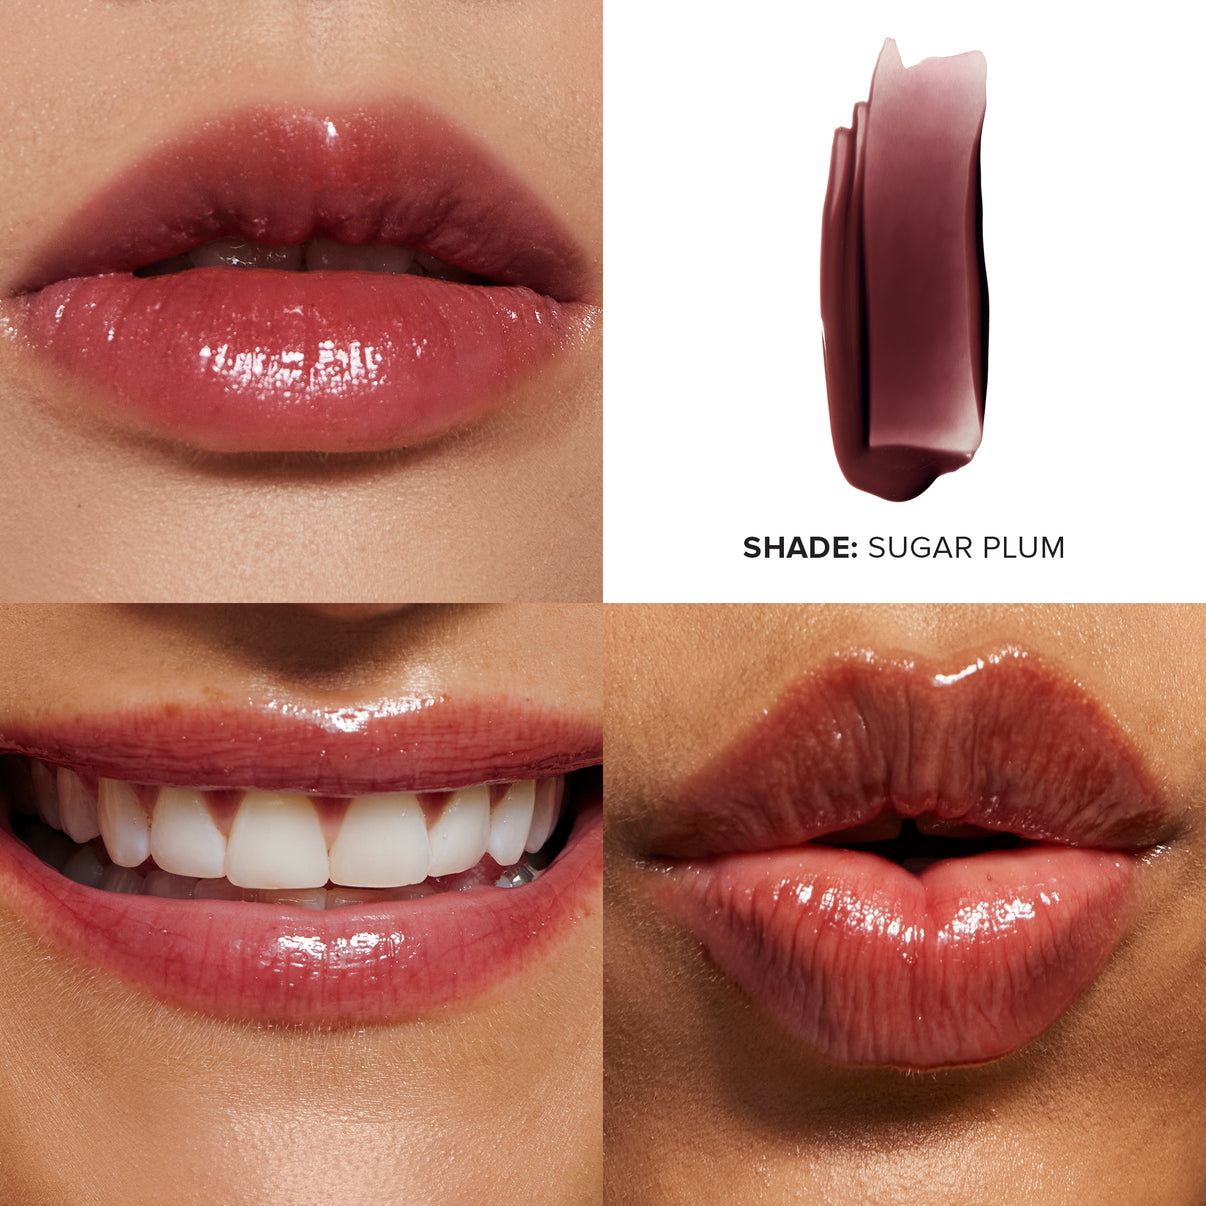 SUGAR PLUM Hydrating Peptide Lip Butter swatches 